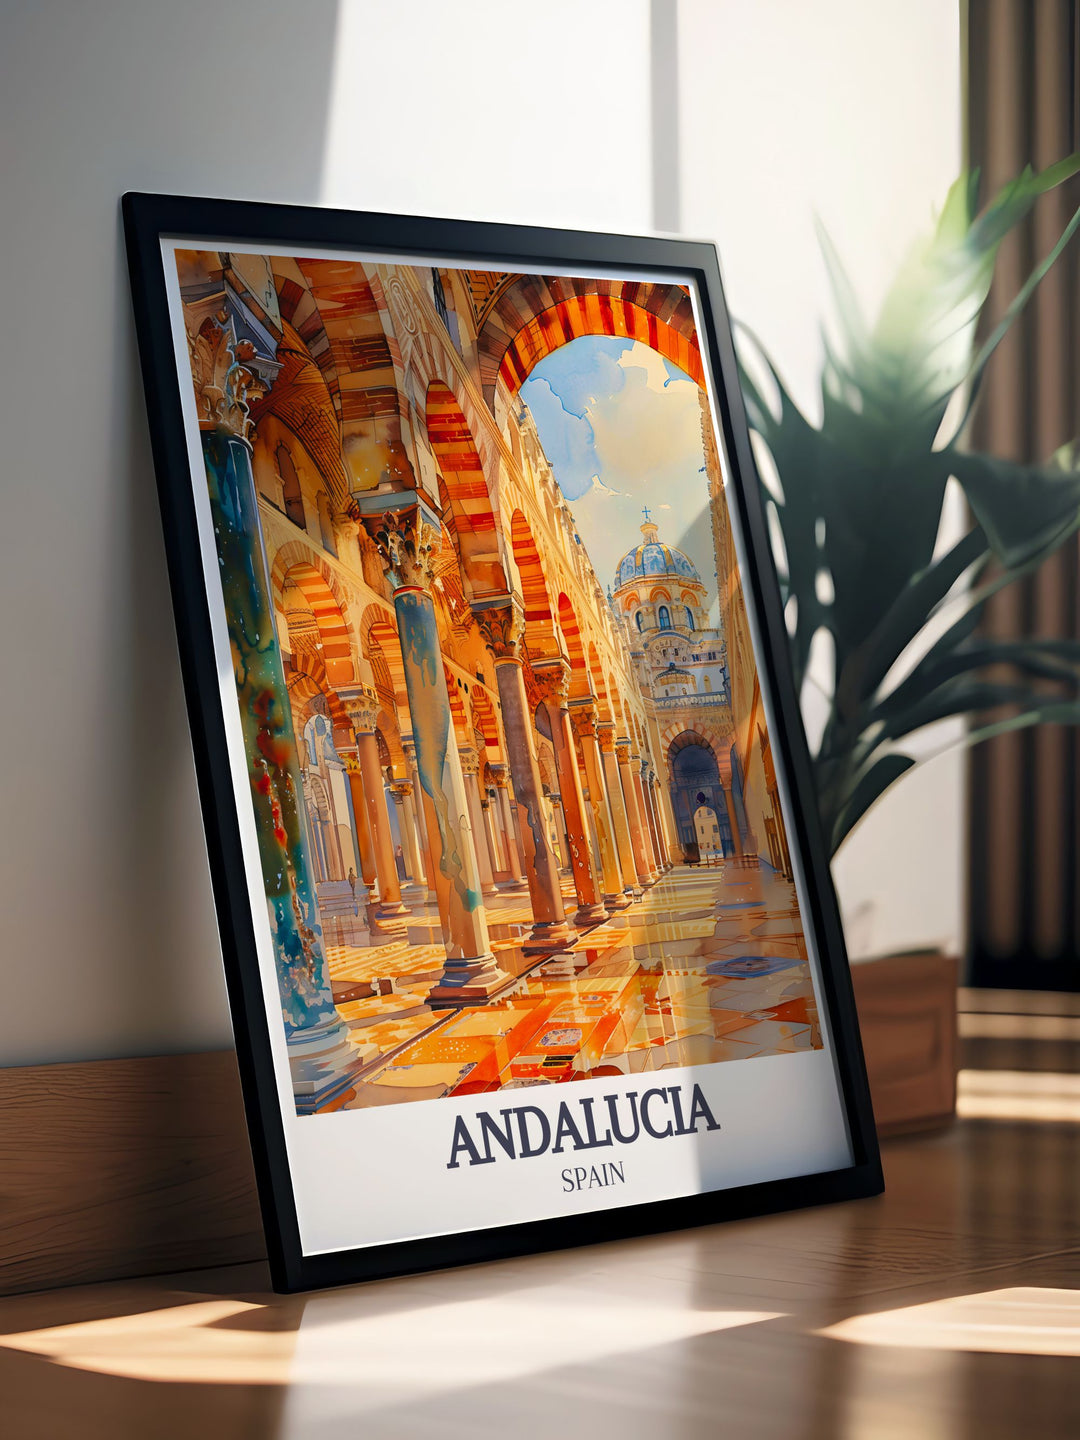 This Mezquita Catedral travel poster brings the breathtaking beauty of Andalucia into your home, with detailed illustrations of its ornate arches and the iconic bell tower.